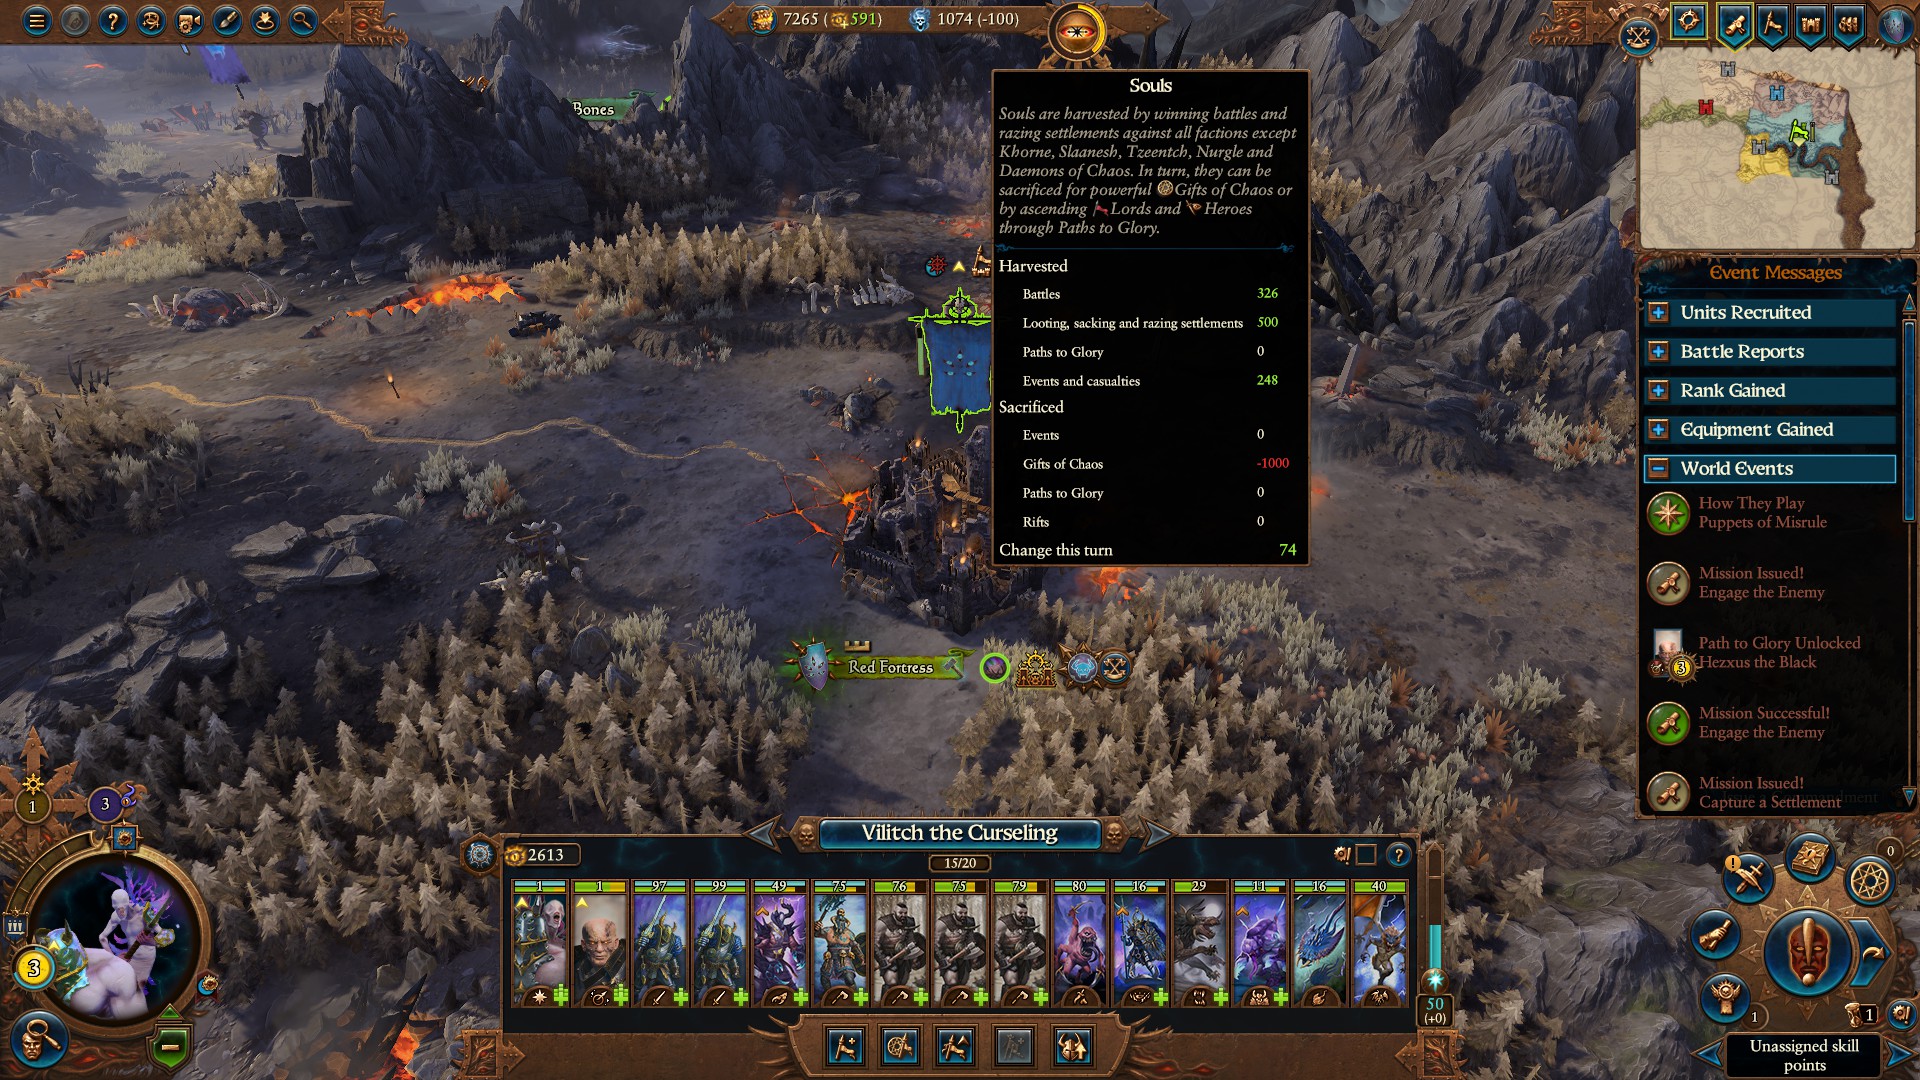 Total War: Warhammer 3 Immortal Empires Vilitch - Warriors of Chaos campaign overview, guide and second thoughts image 3